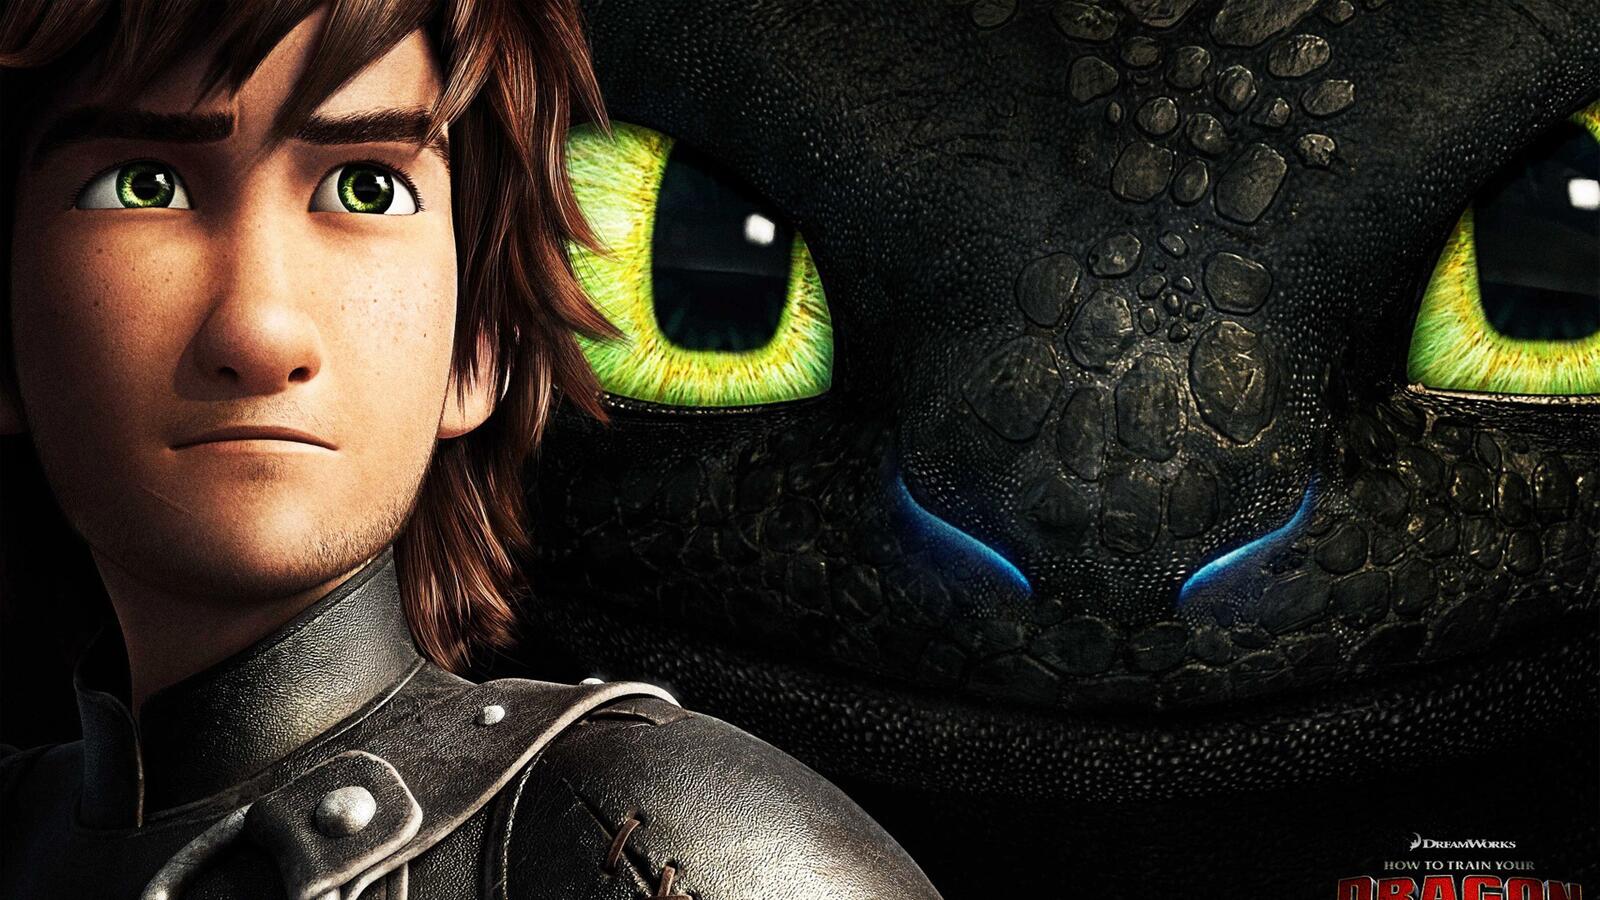 Wallpapers how to train your dragon movies animated movies on the desktop